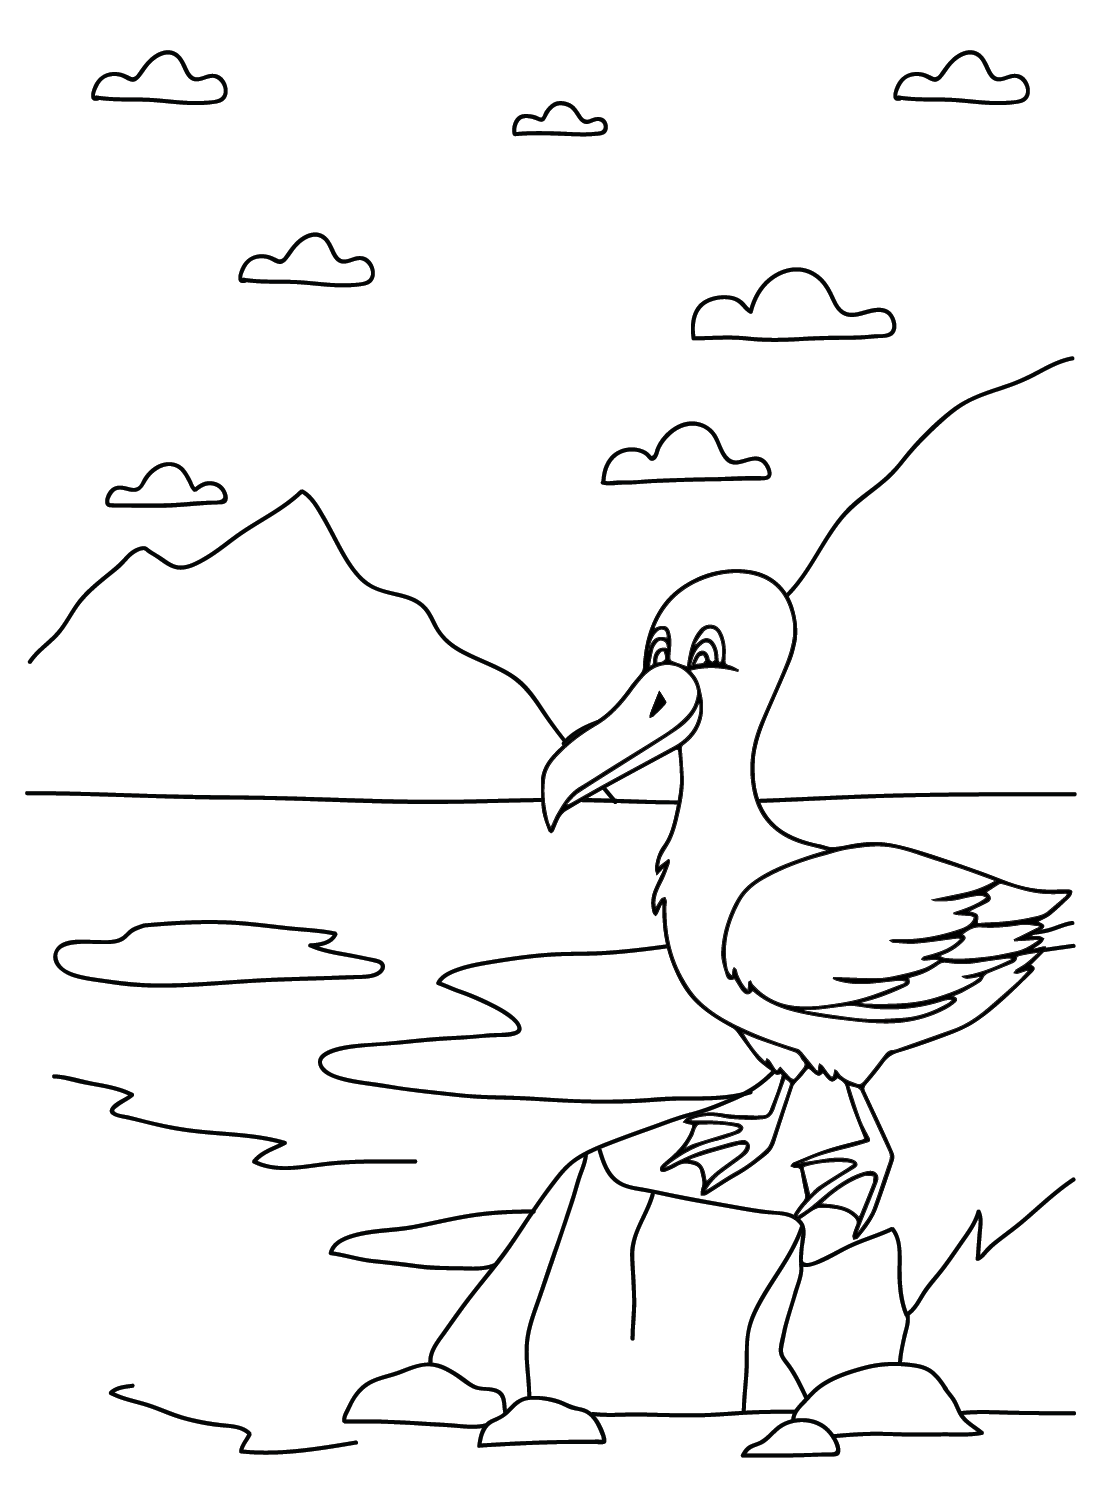 Albatross Coloring Page from Albatross